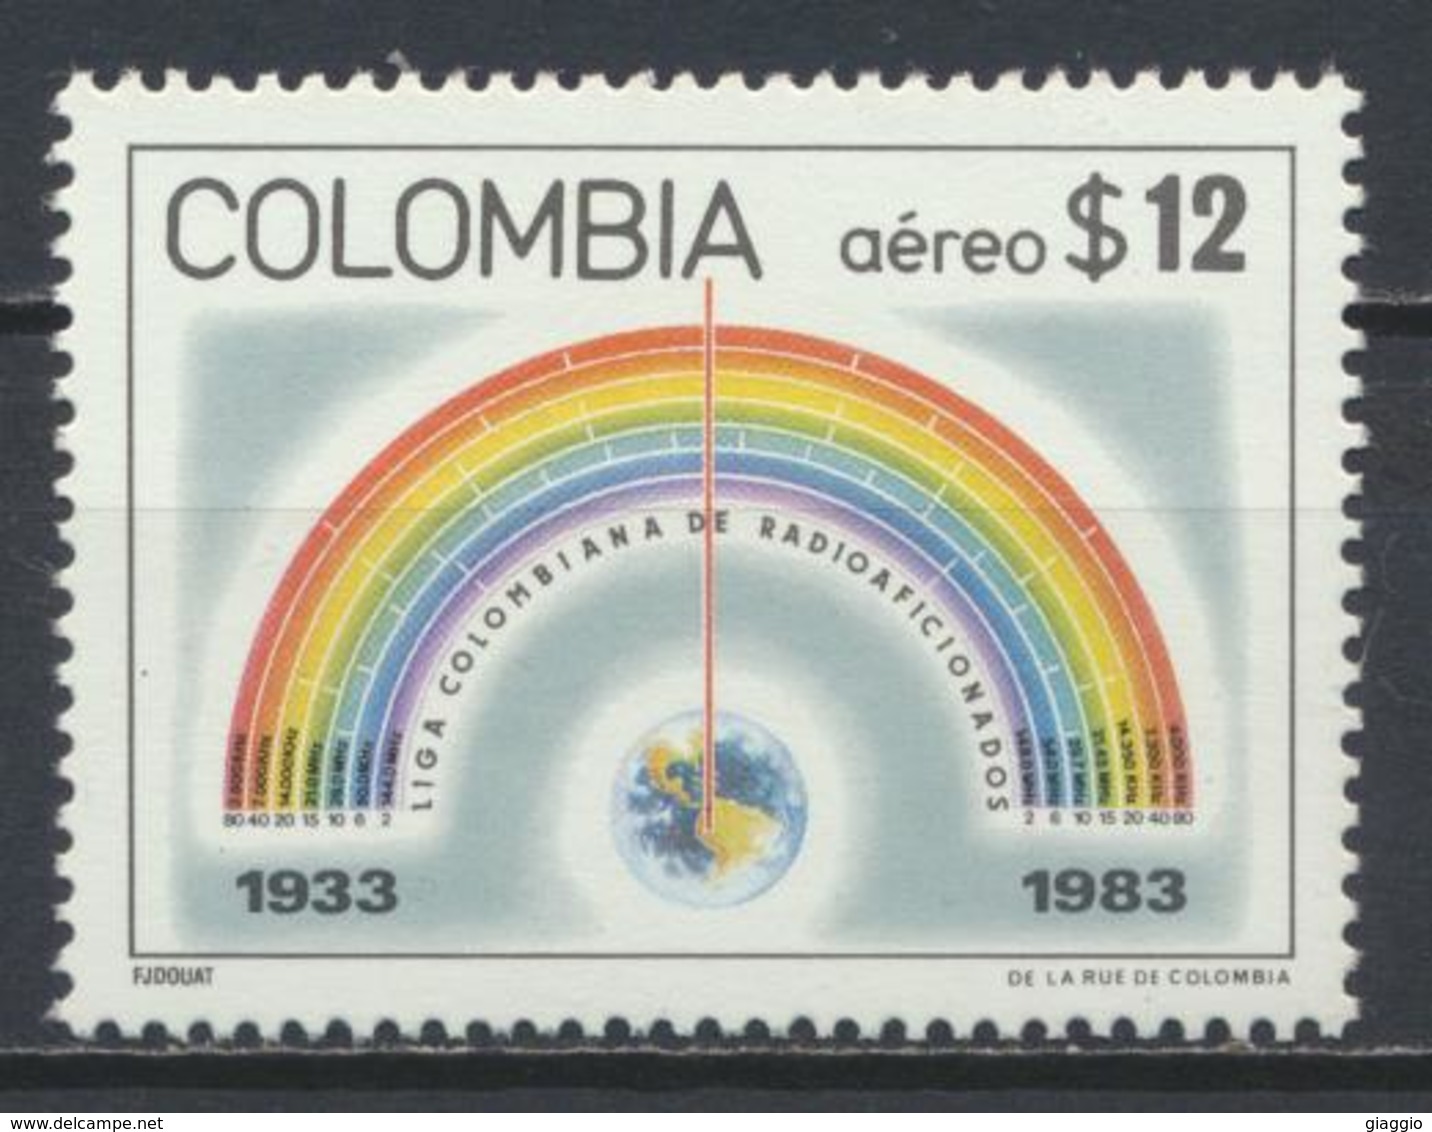 °°° COLOMBIA - Y&T N°722 PA - 1983 MNH °°° - Colombia